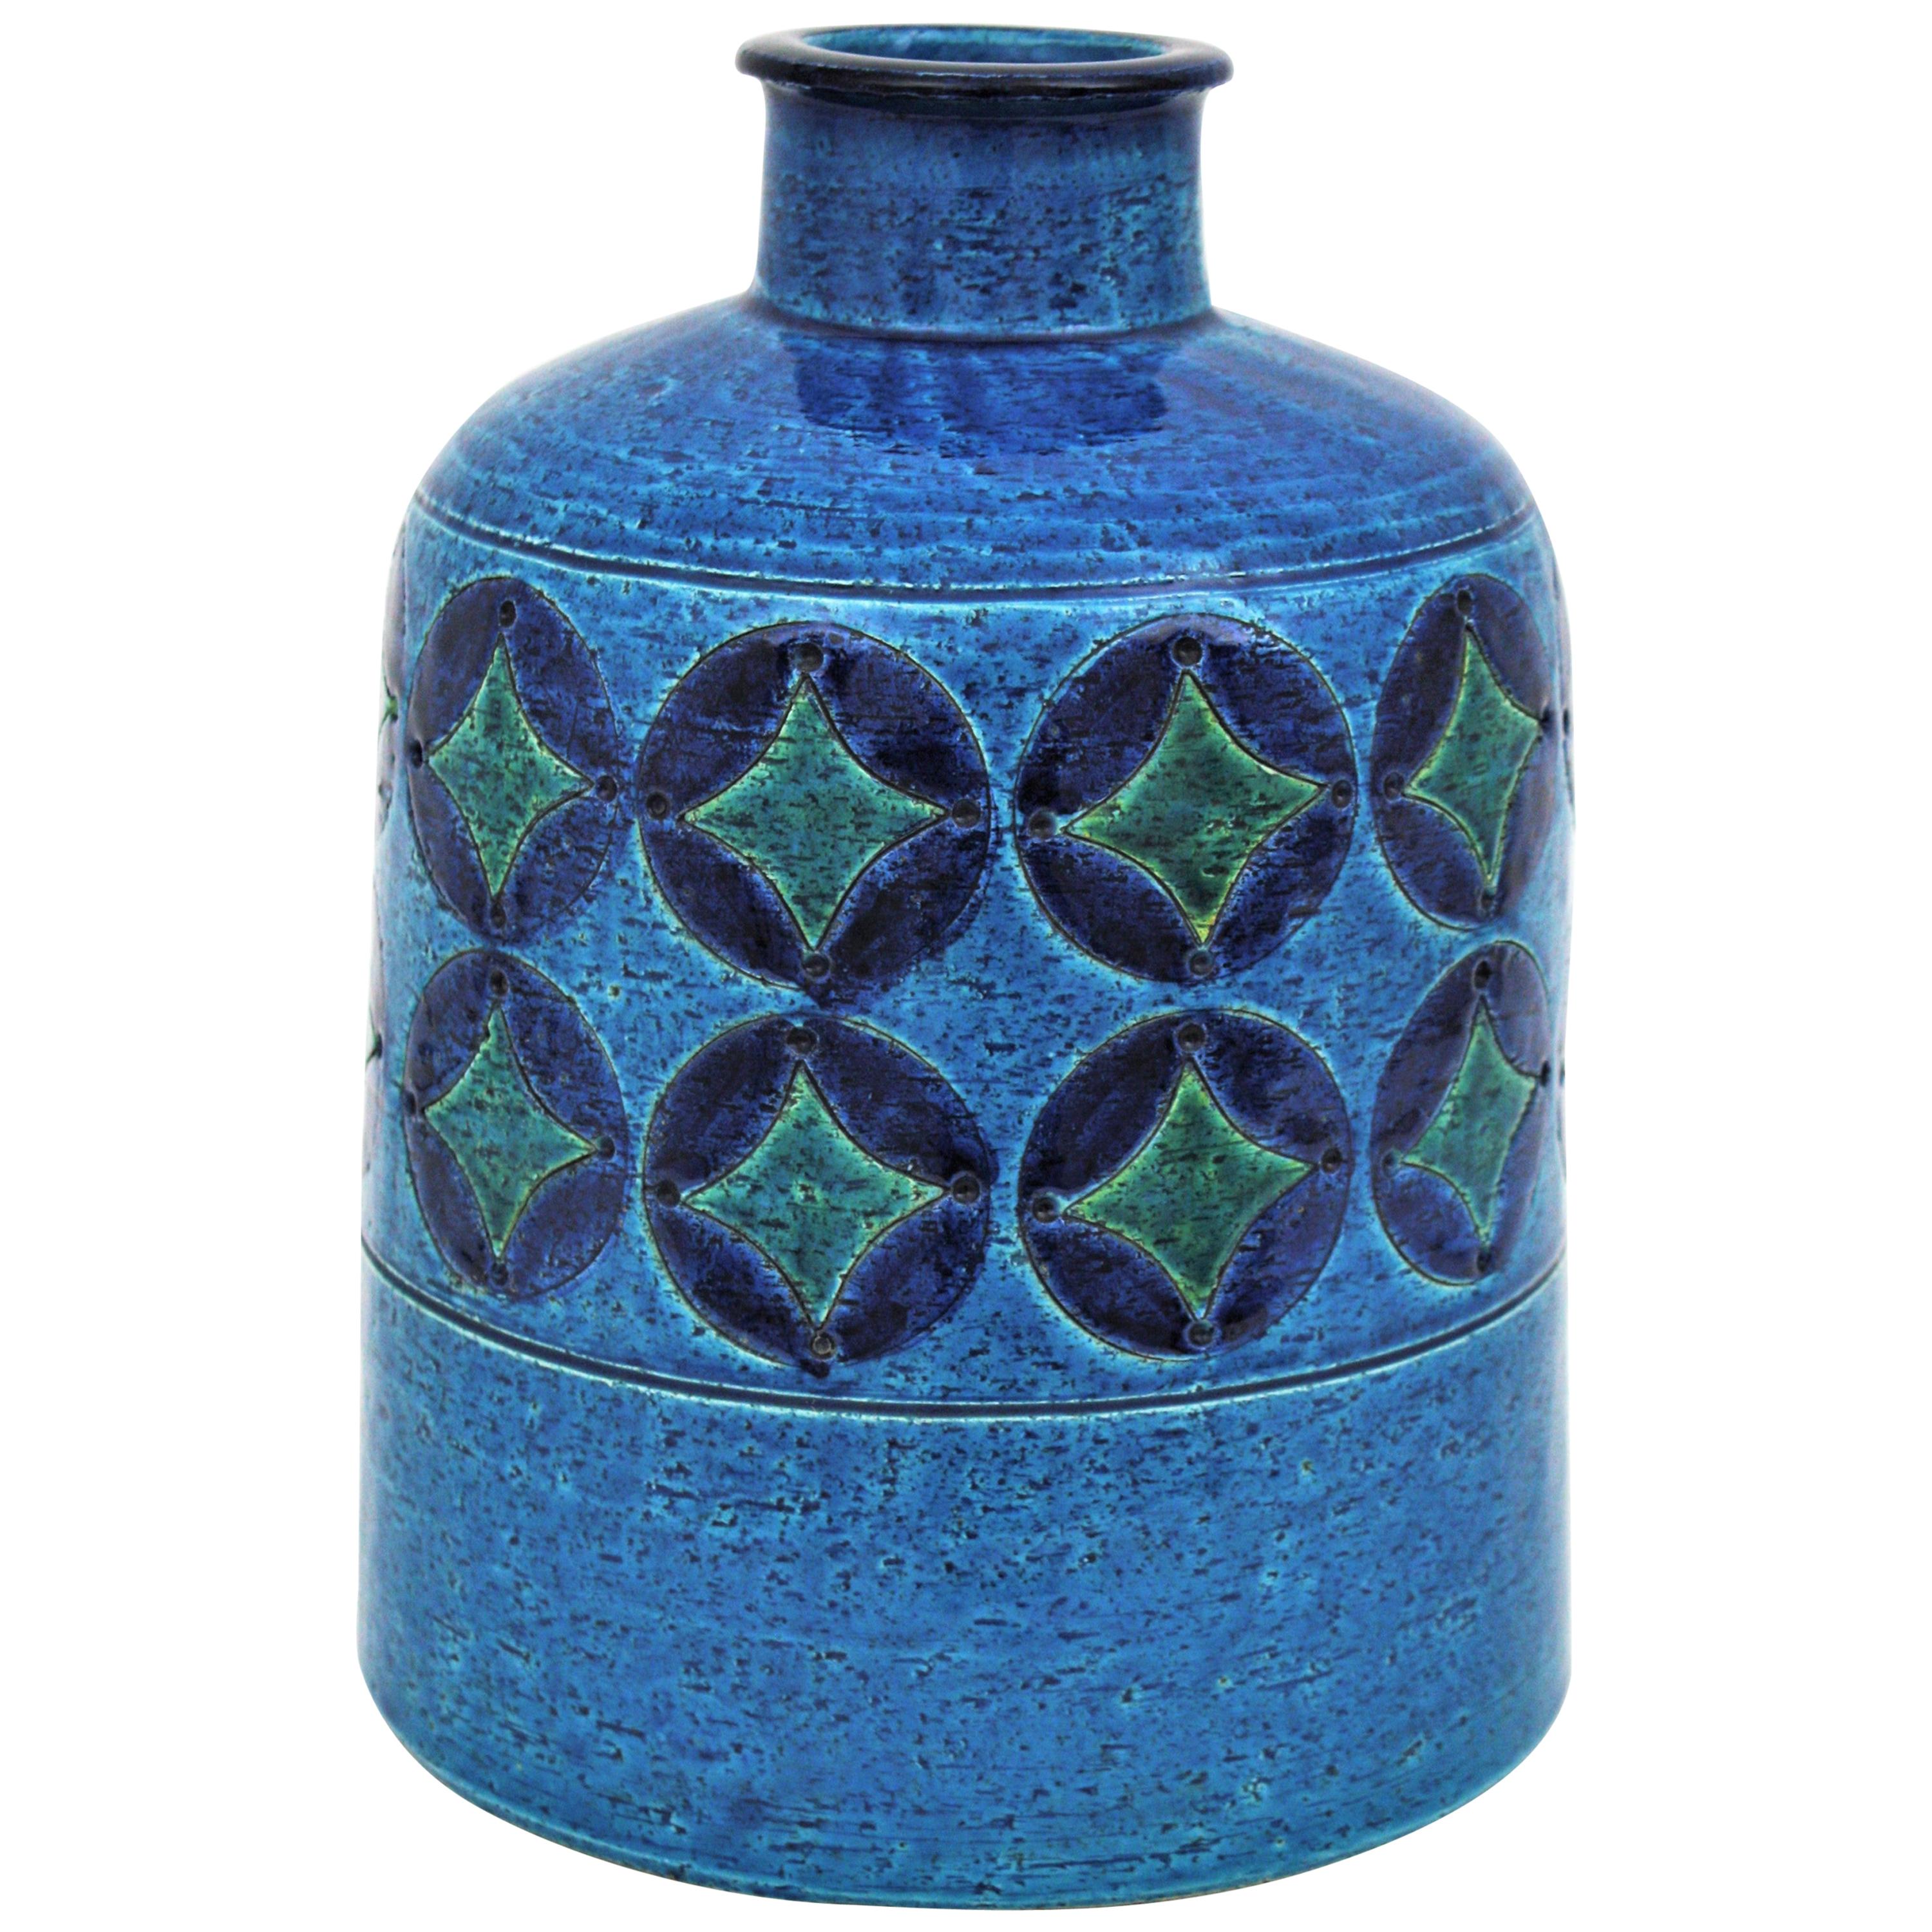 Bitossi Aldo Londi Blue Ceramic Large Bottle Vase with Circles & Rhombus Motif In Excellent Condition For Sale In Barcelona, ES